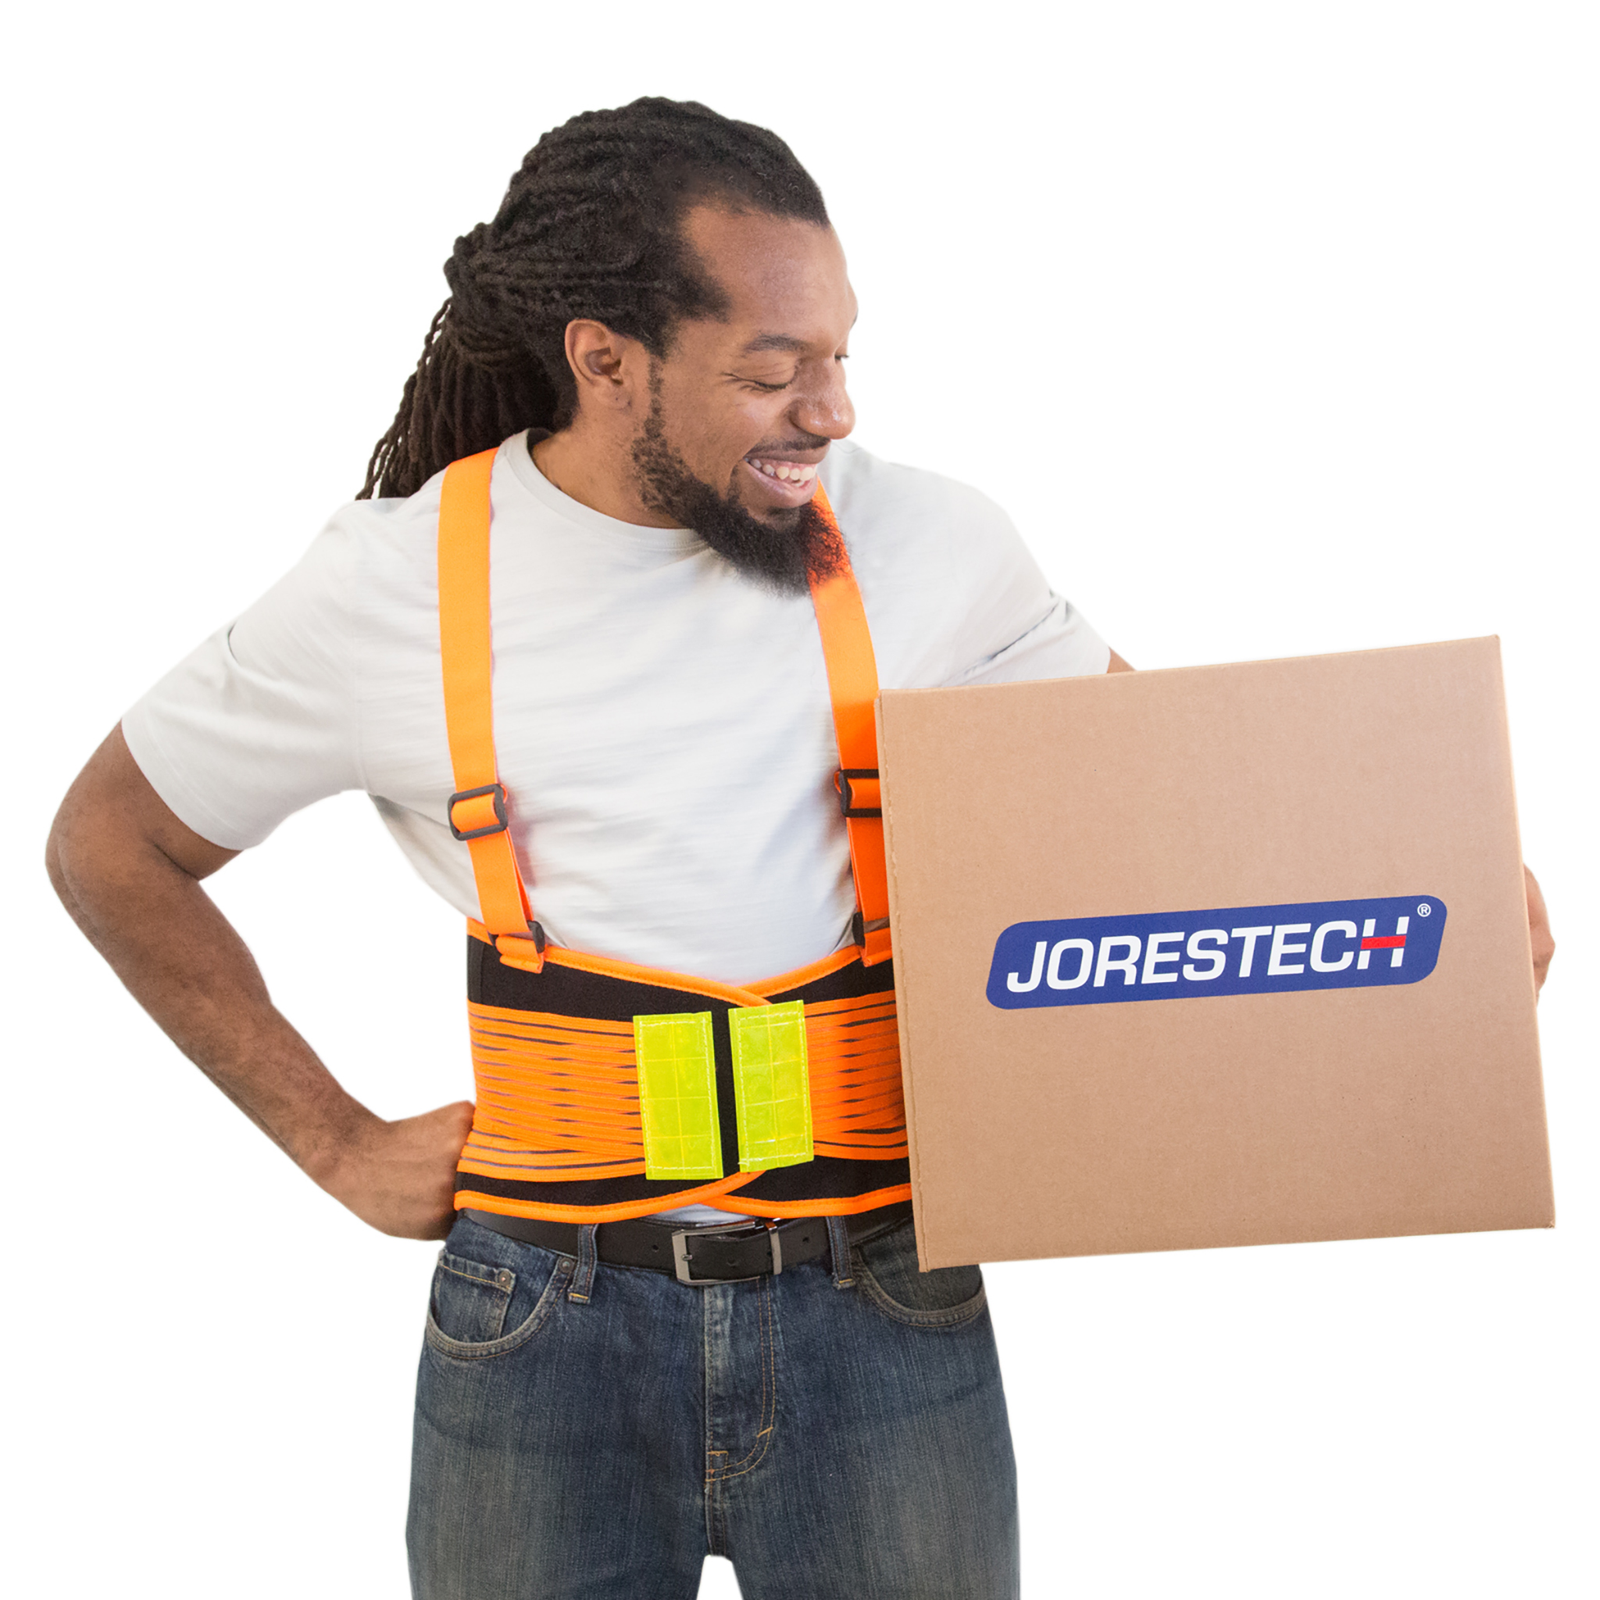 A worker wearing the back support belt for lumbar support while carrying a heavy card box to avoid back injuries.